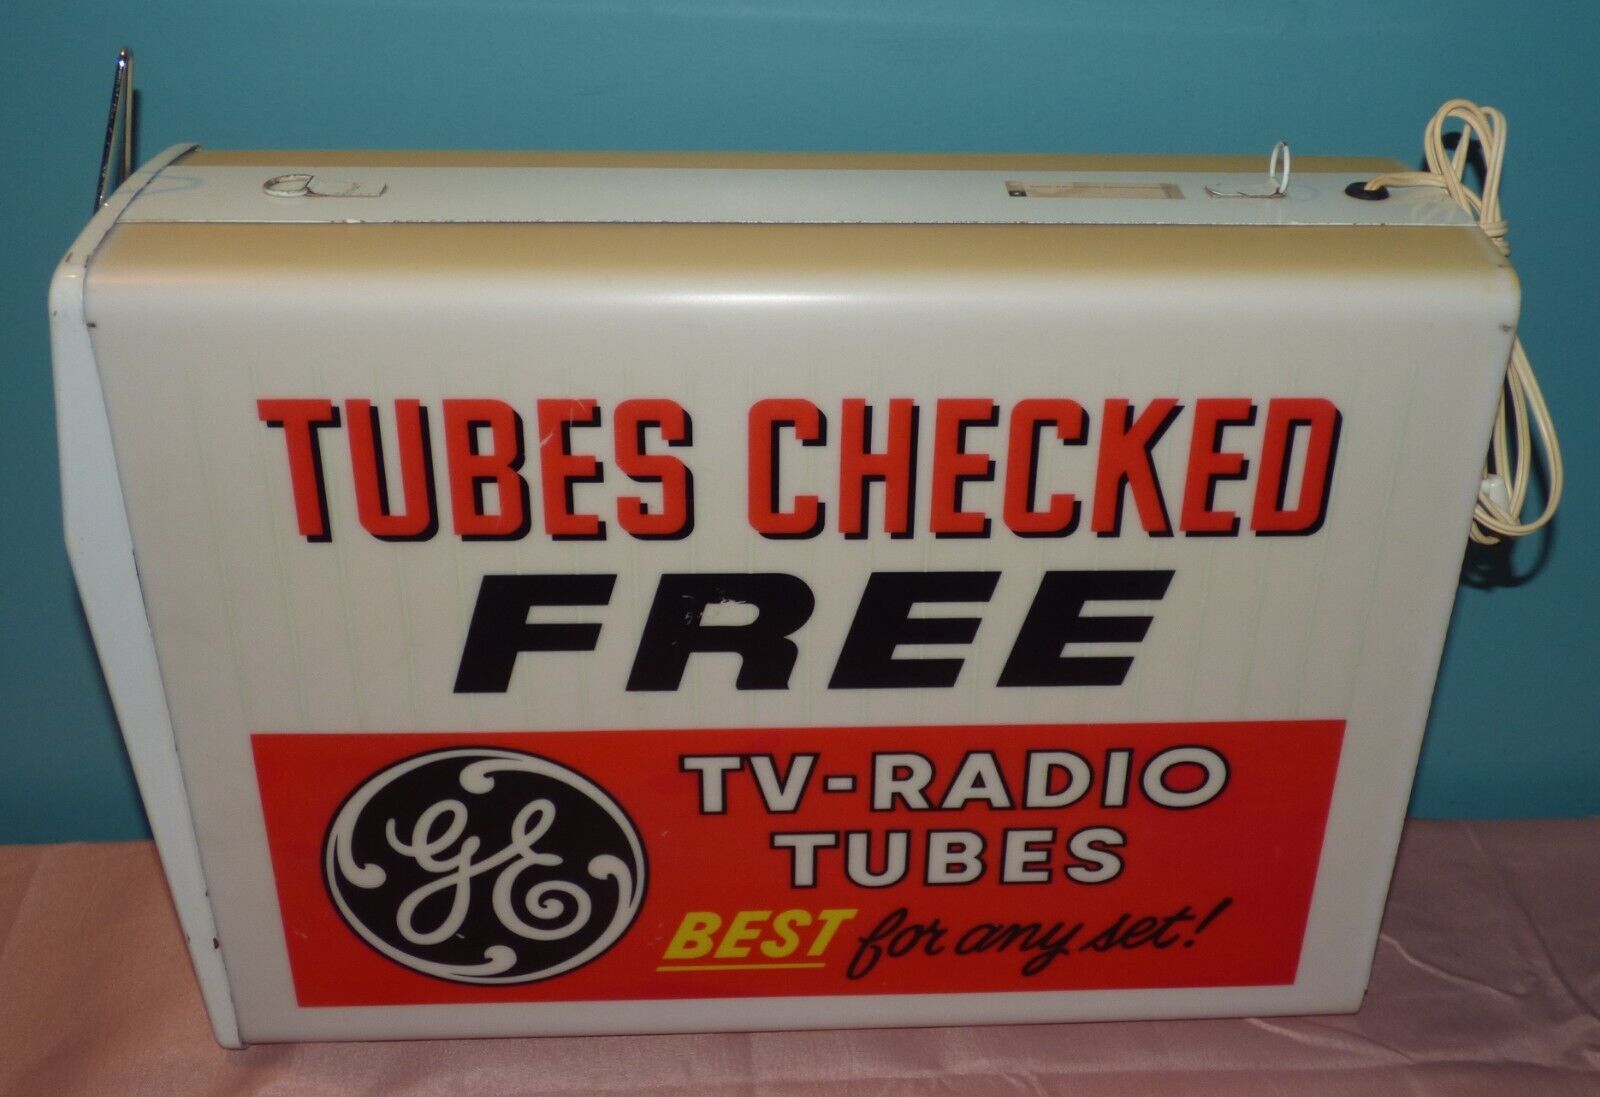 Vintage GE Tubes Checked Free TV-Radio Tubes Hanging Lighted Sign